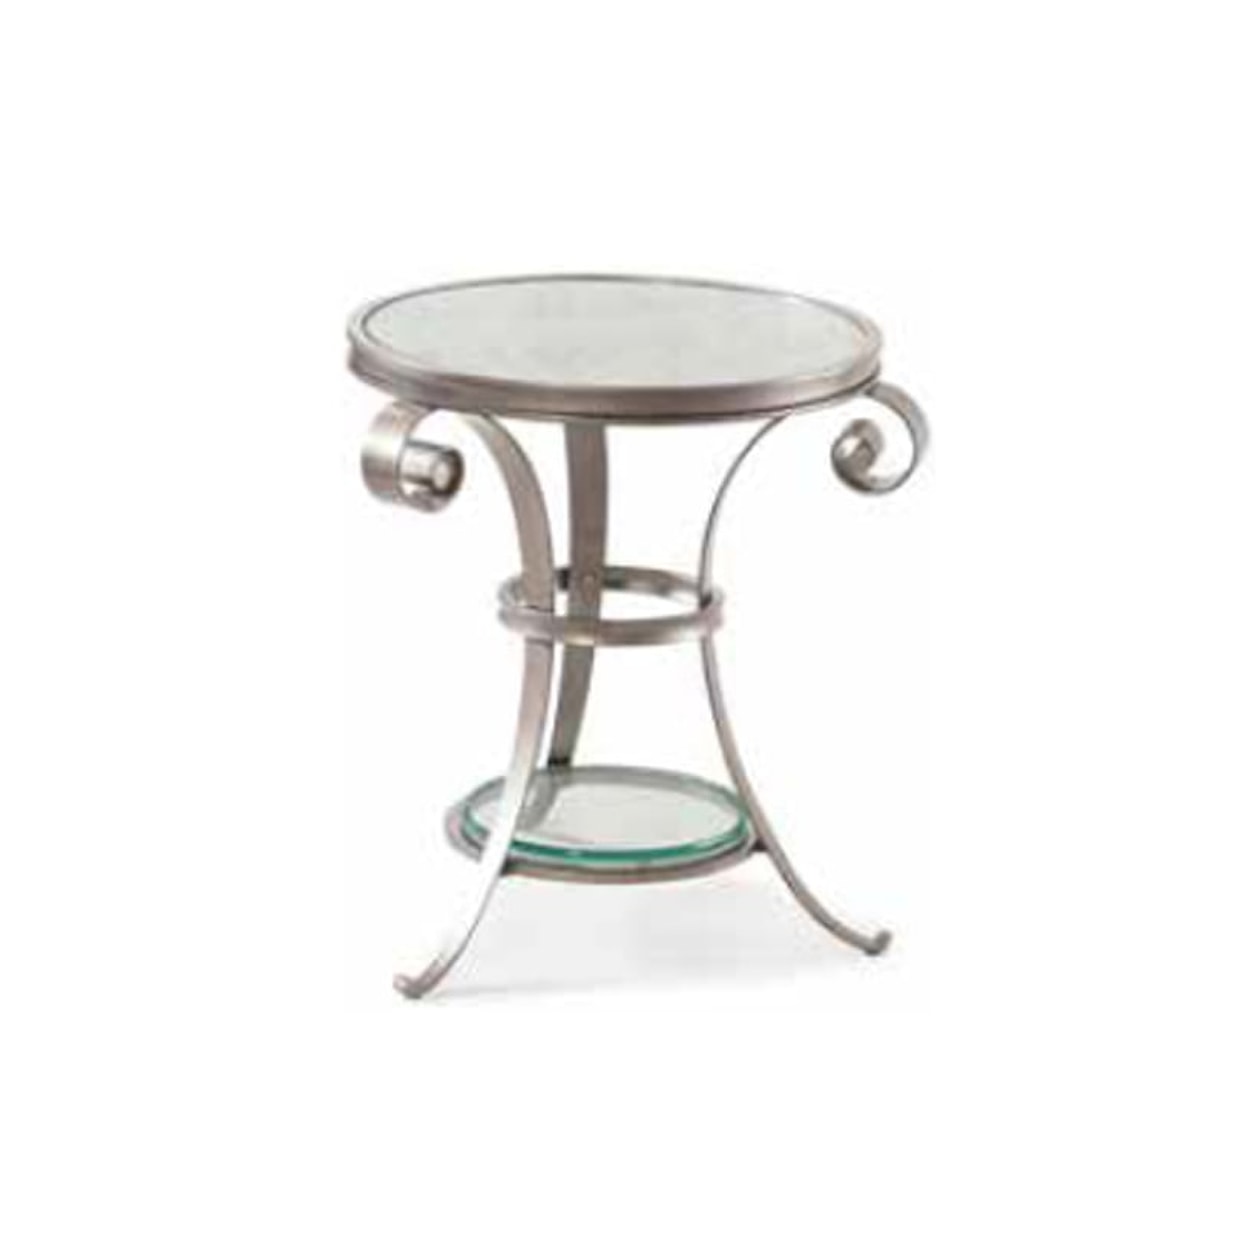 Trisha Yearwood Home Collection by Legacy Classic Jasper County Metal Chairside Table